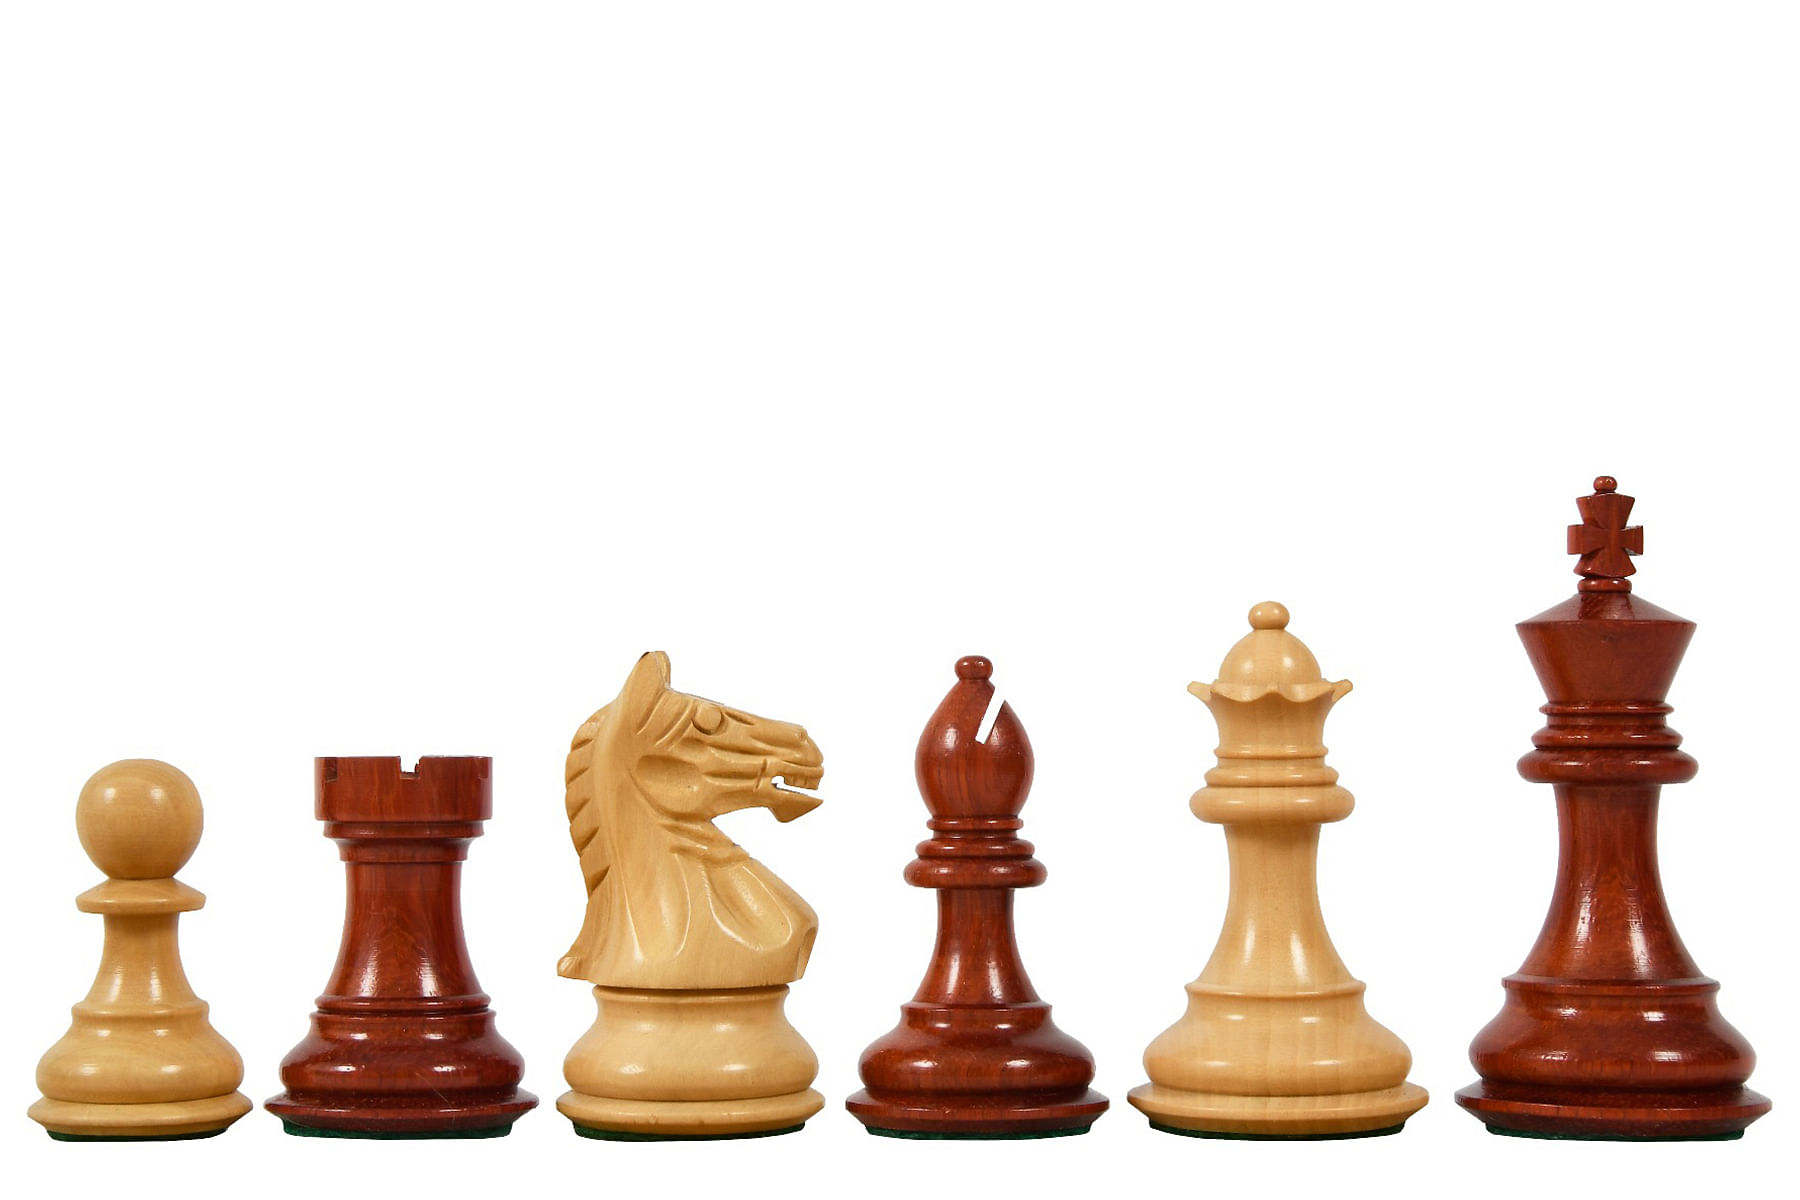 Fierce Knight Staunton Series Wooden Weighted Chess Pieces in Bud Rose & Box Wood - 3.0